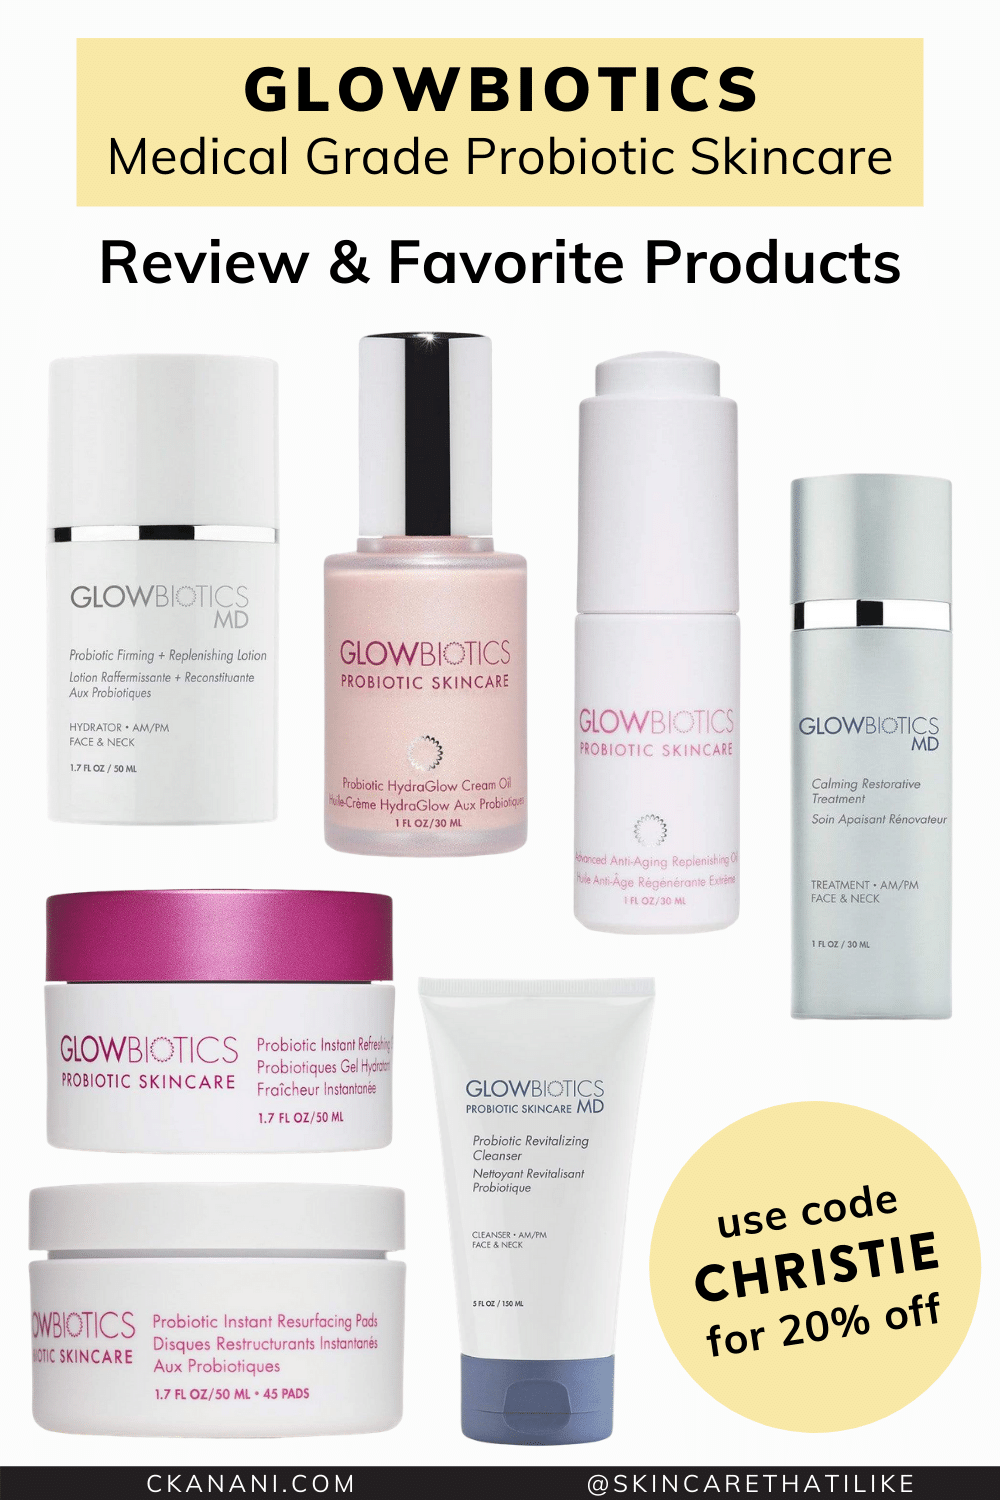 Glowbiotics Probiotic Skin Care: a product review + 20% off code. A fantastic medical grade skin care line. Looking for skin care products or an effective anti aging skin care routine? This is it.